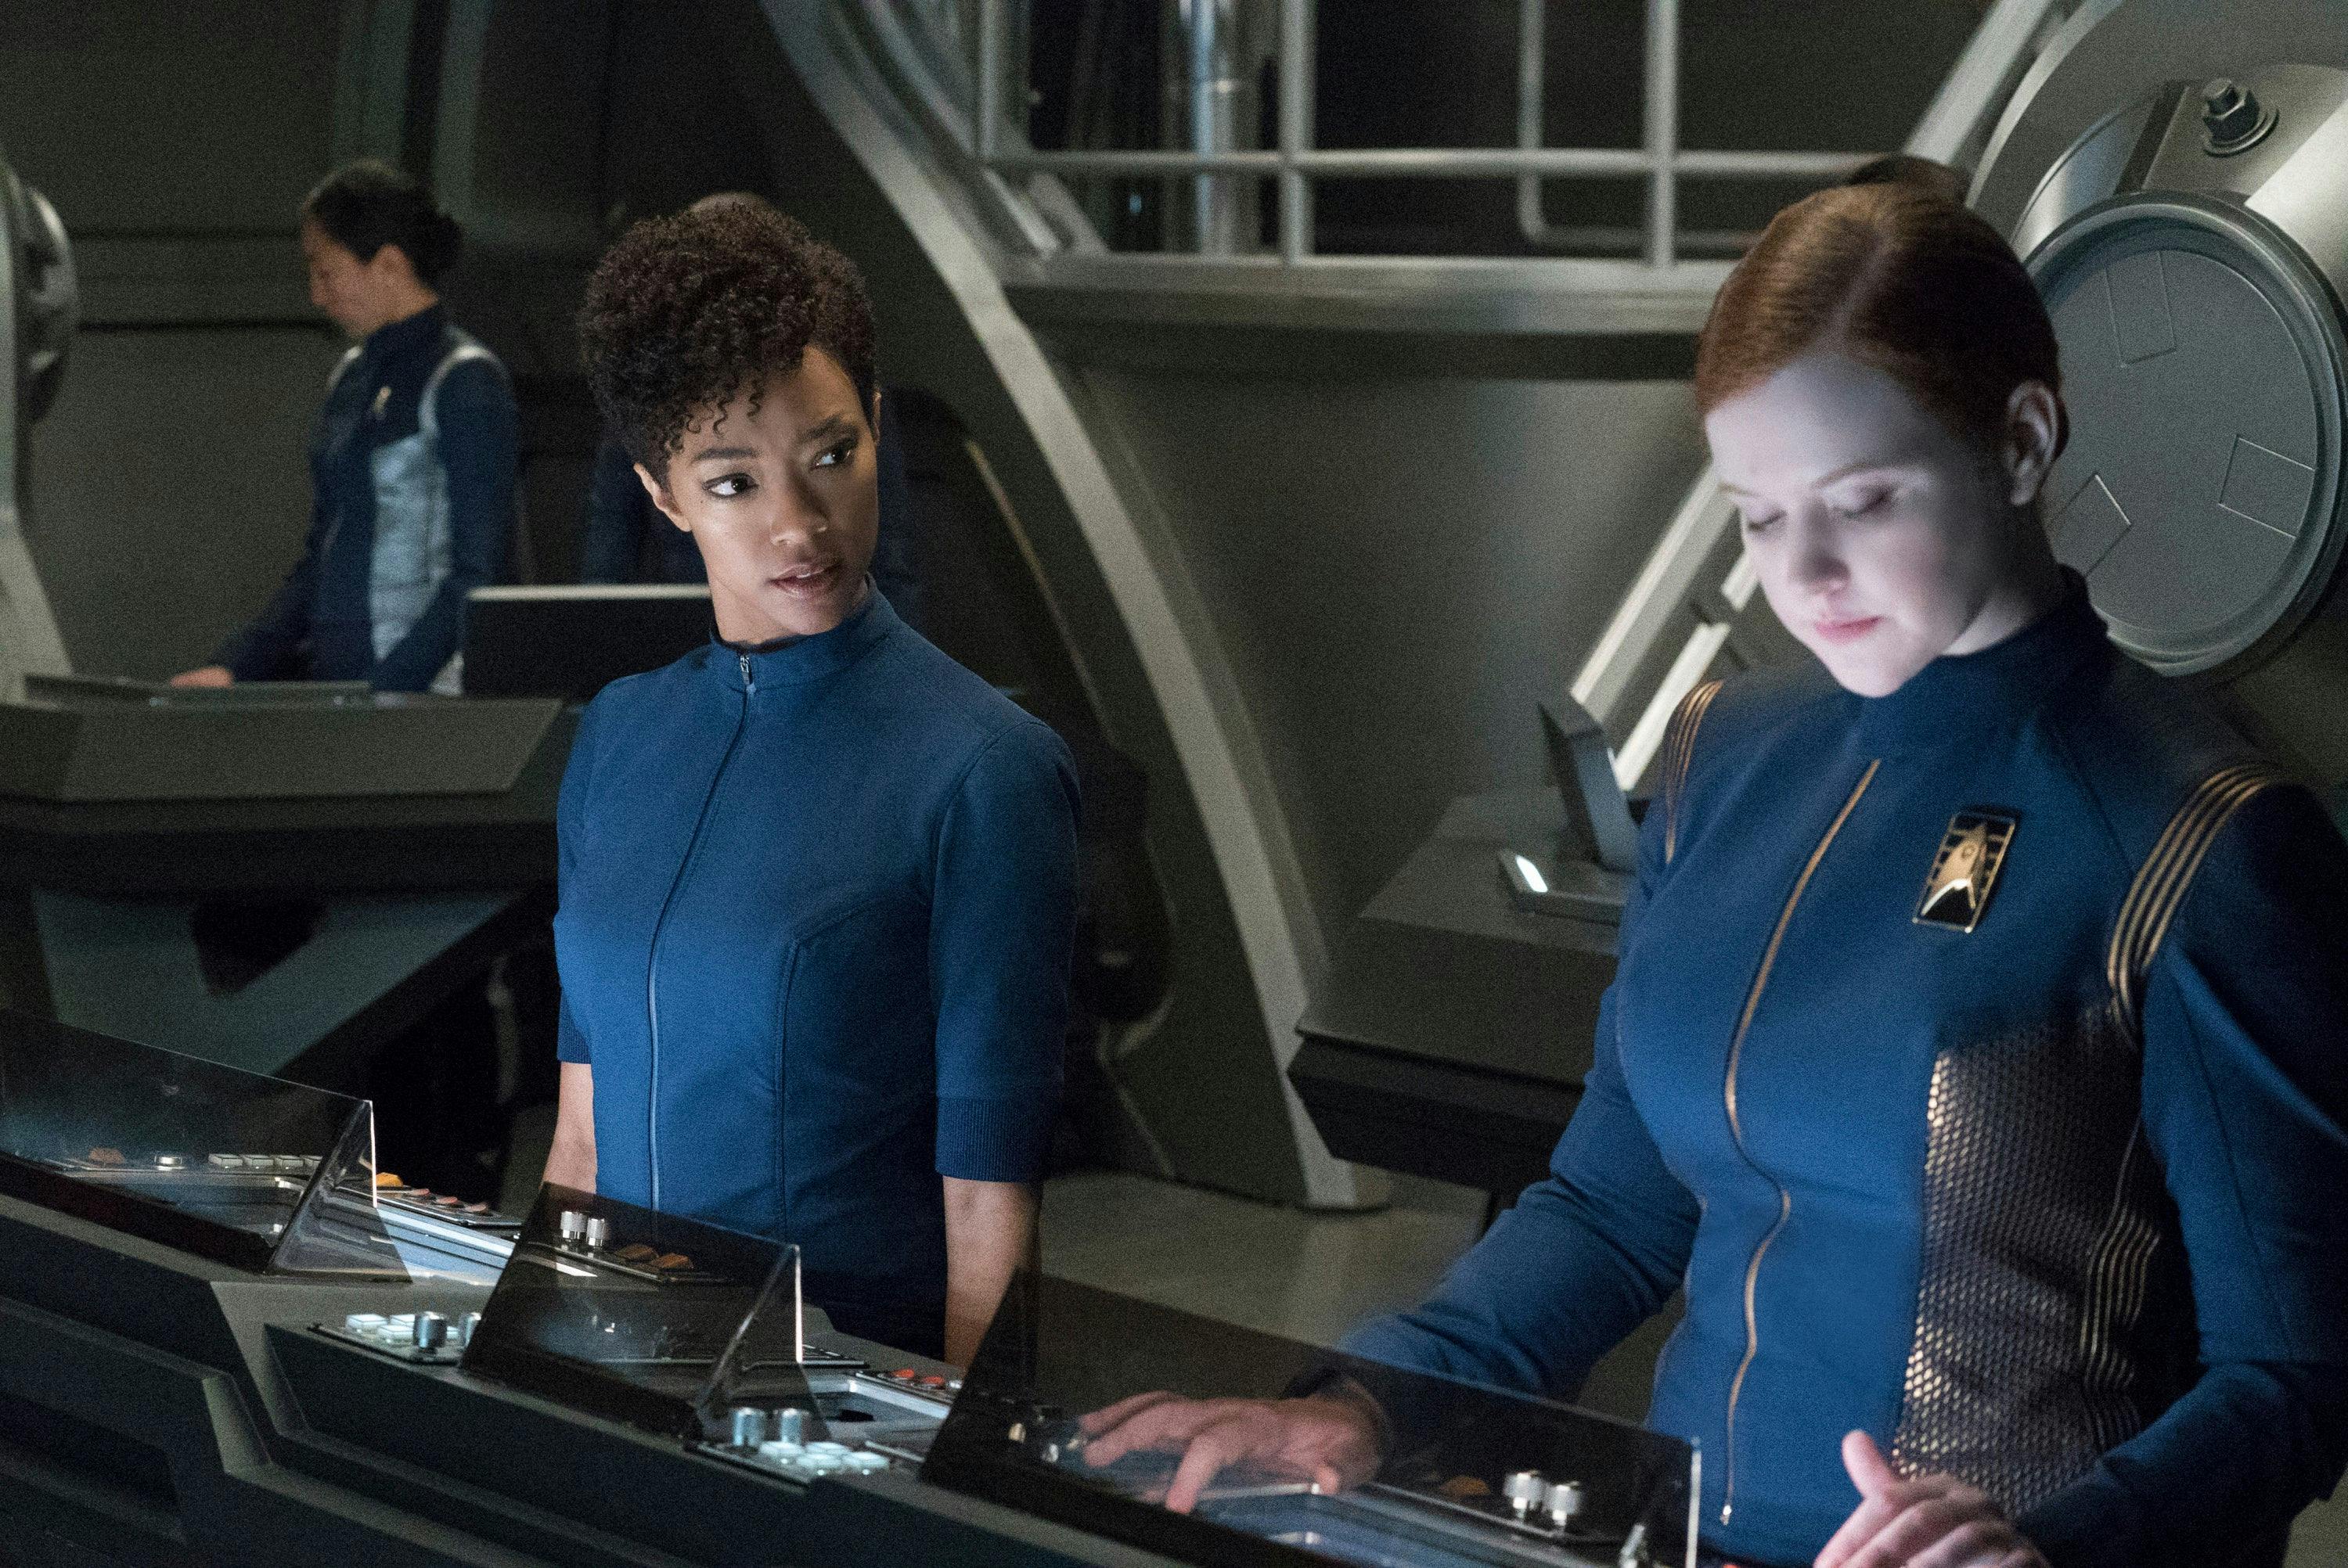 Michael Burnham looks over her shoulder towards Cadet Sylvia Tilly in 'Context is For Kings'